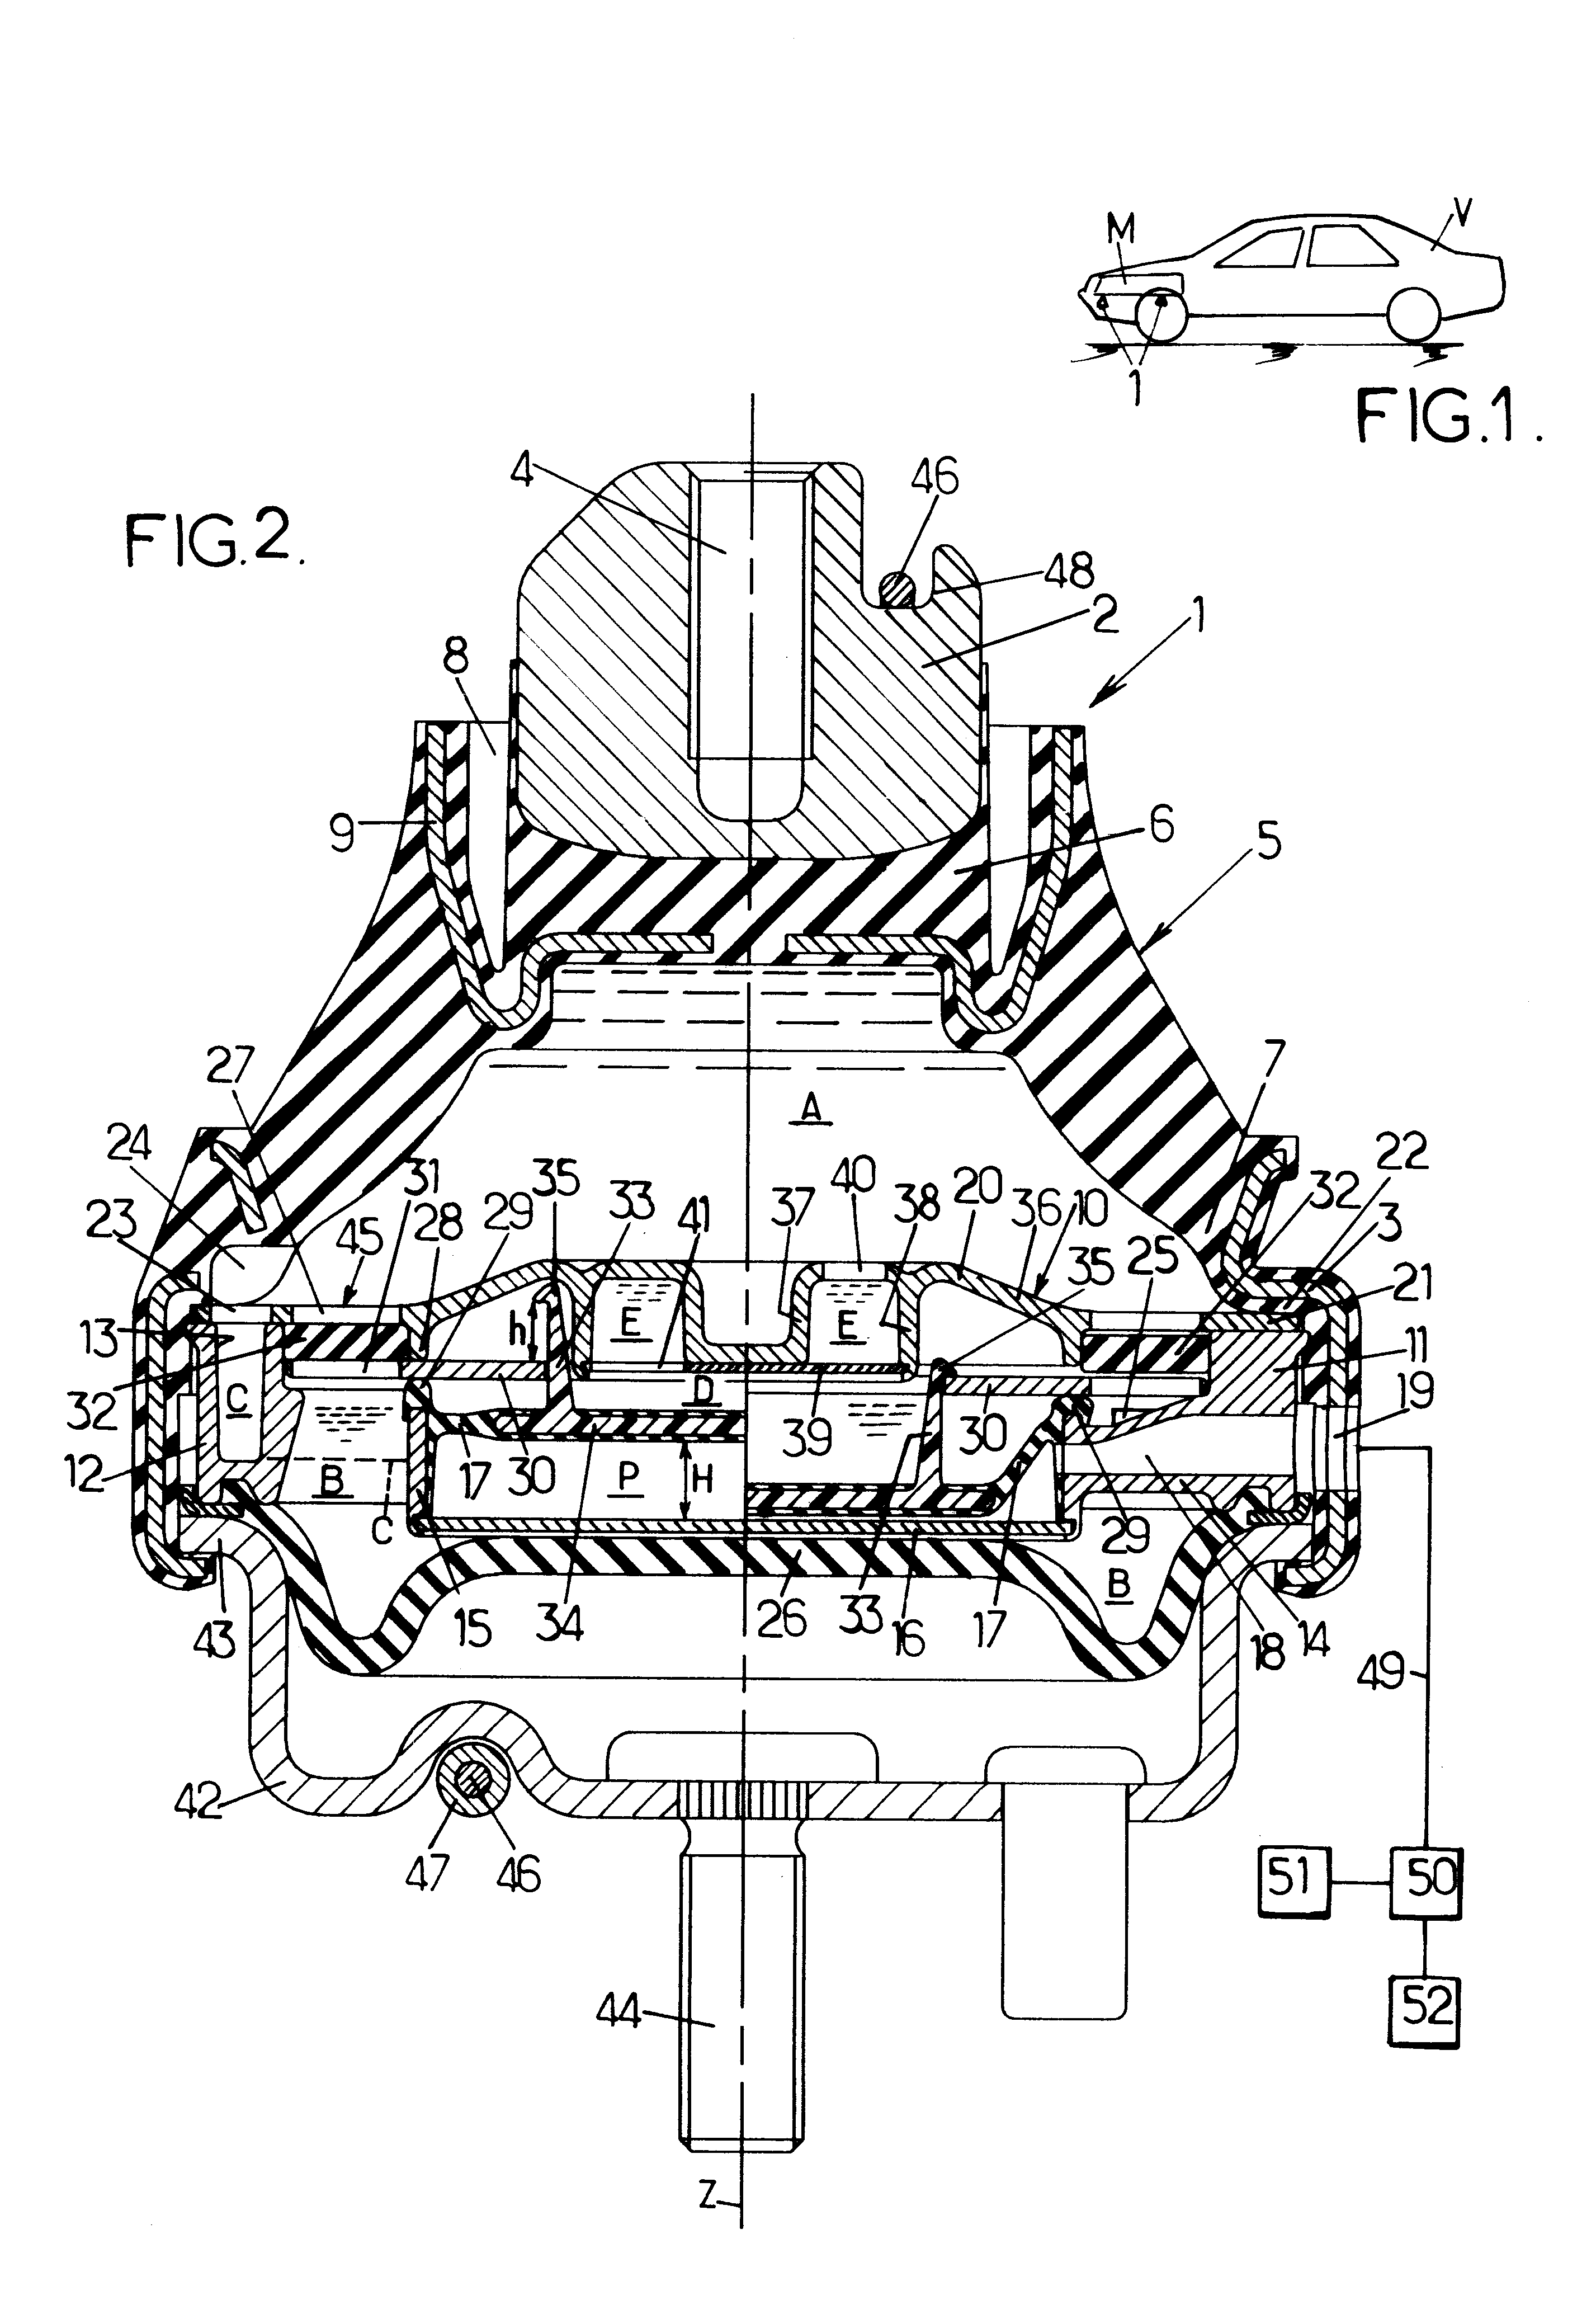 Method of damping vibration, active hydraulic anti-vibration mount and vehicle including such a mount